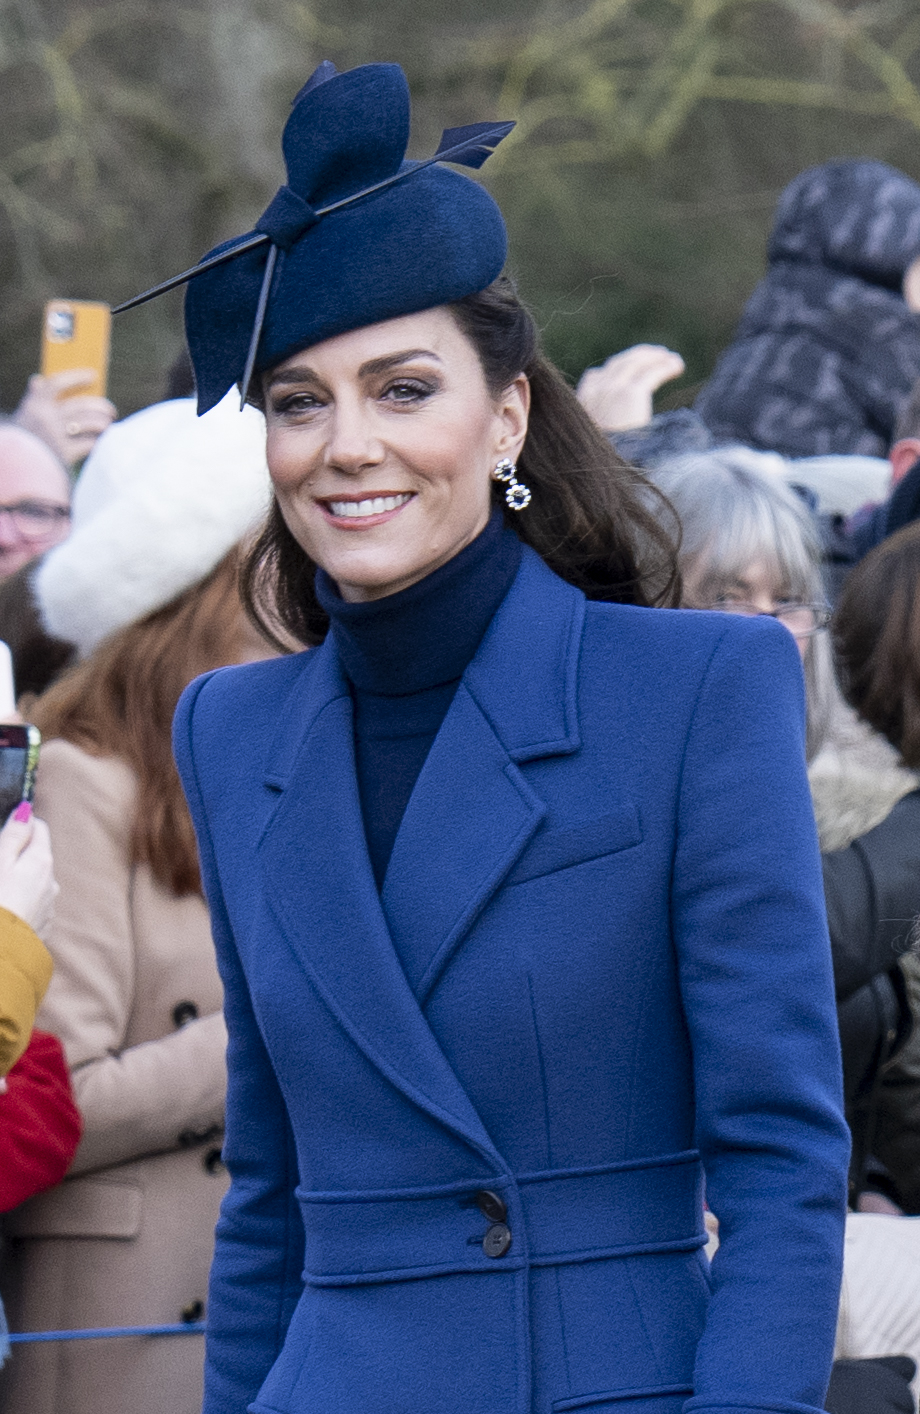 Kate in blue coat and matching hat smiling with people in the background